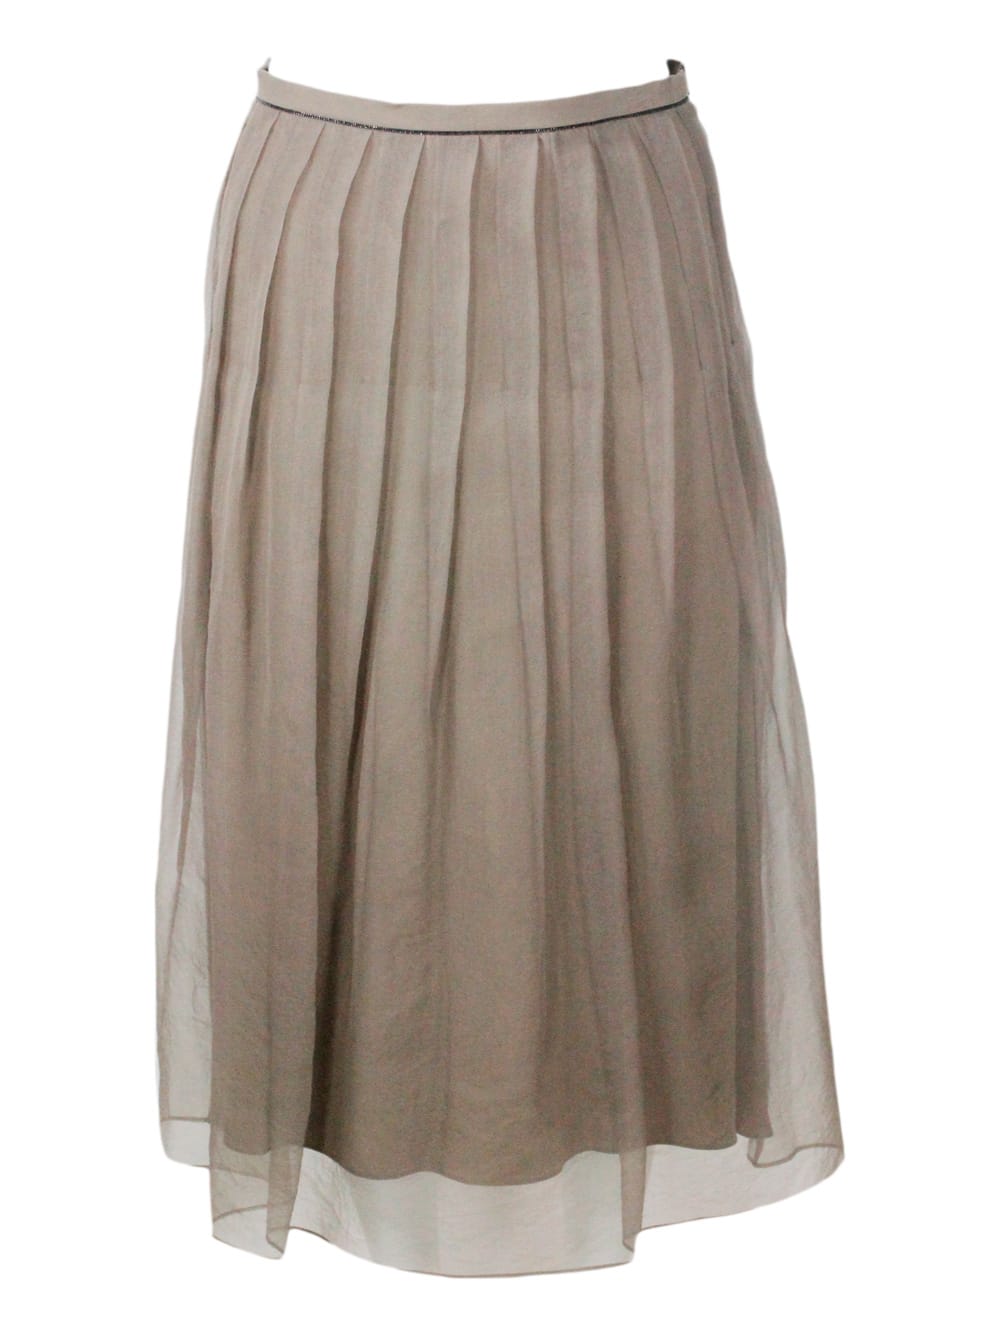 BRUNELLO CUCINELLI LONG PLEATED SKIRT MADE OF FINE SILK WITH UNDERLYING LINING. SIDE ZIP CLOSURE AND SHINY JEWEL ON THE